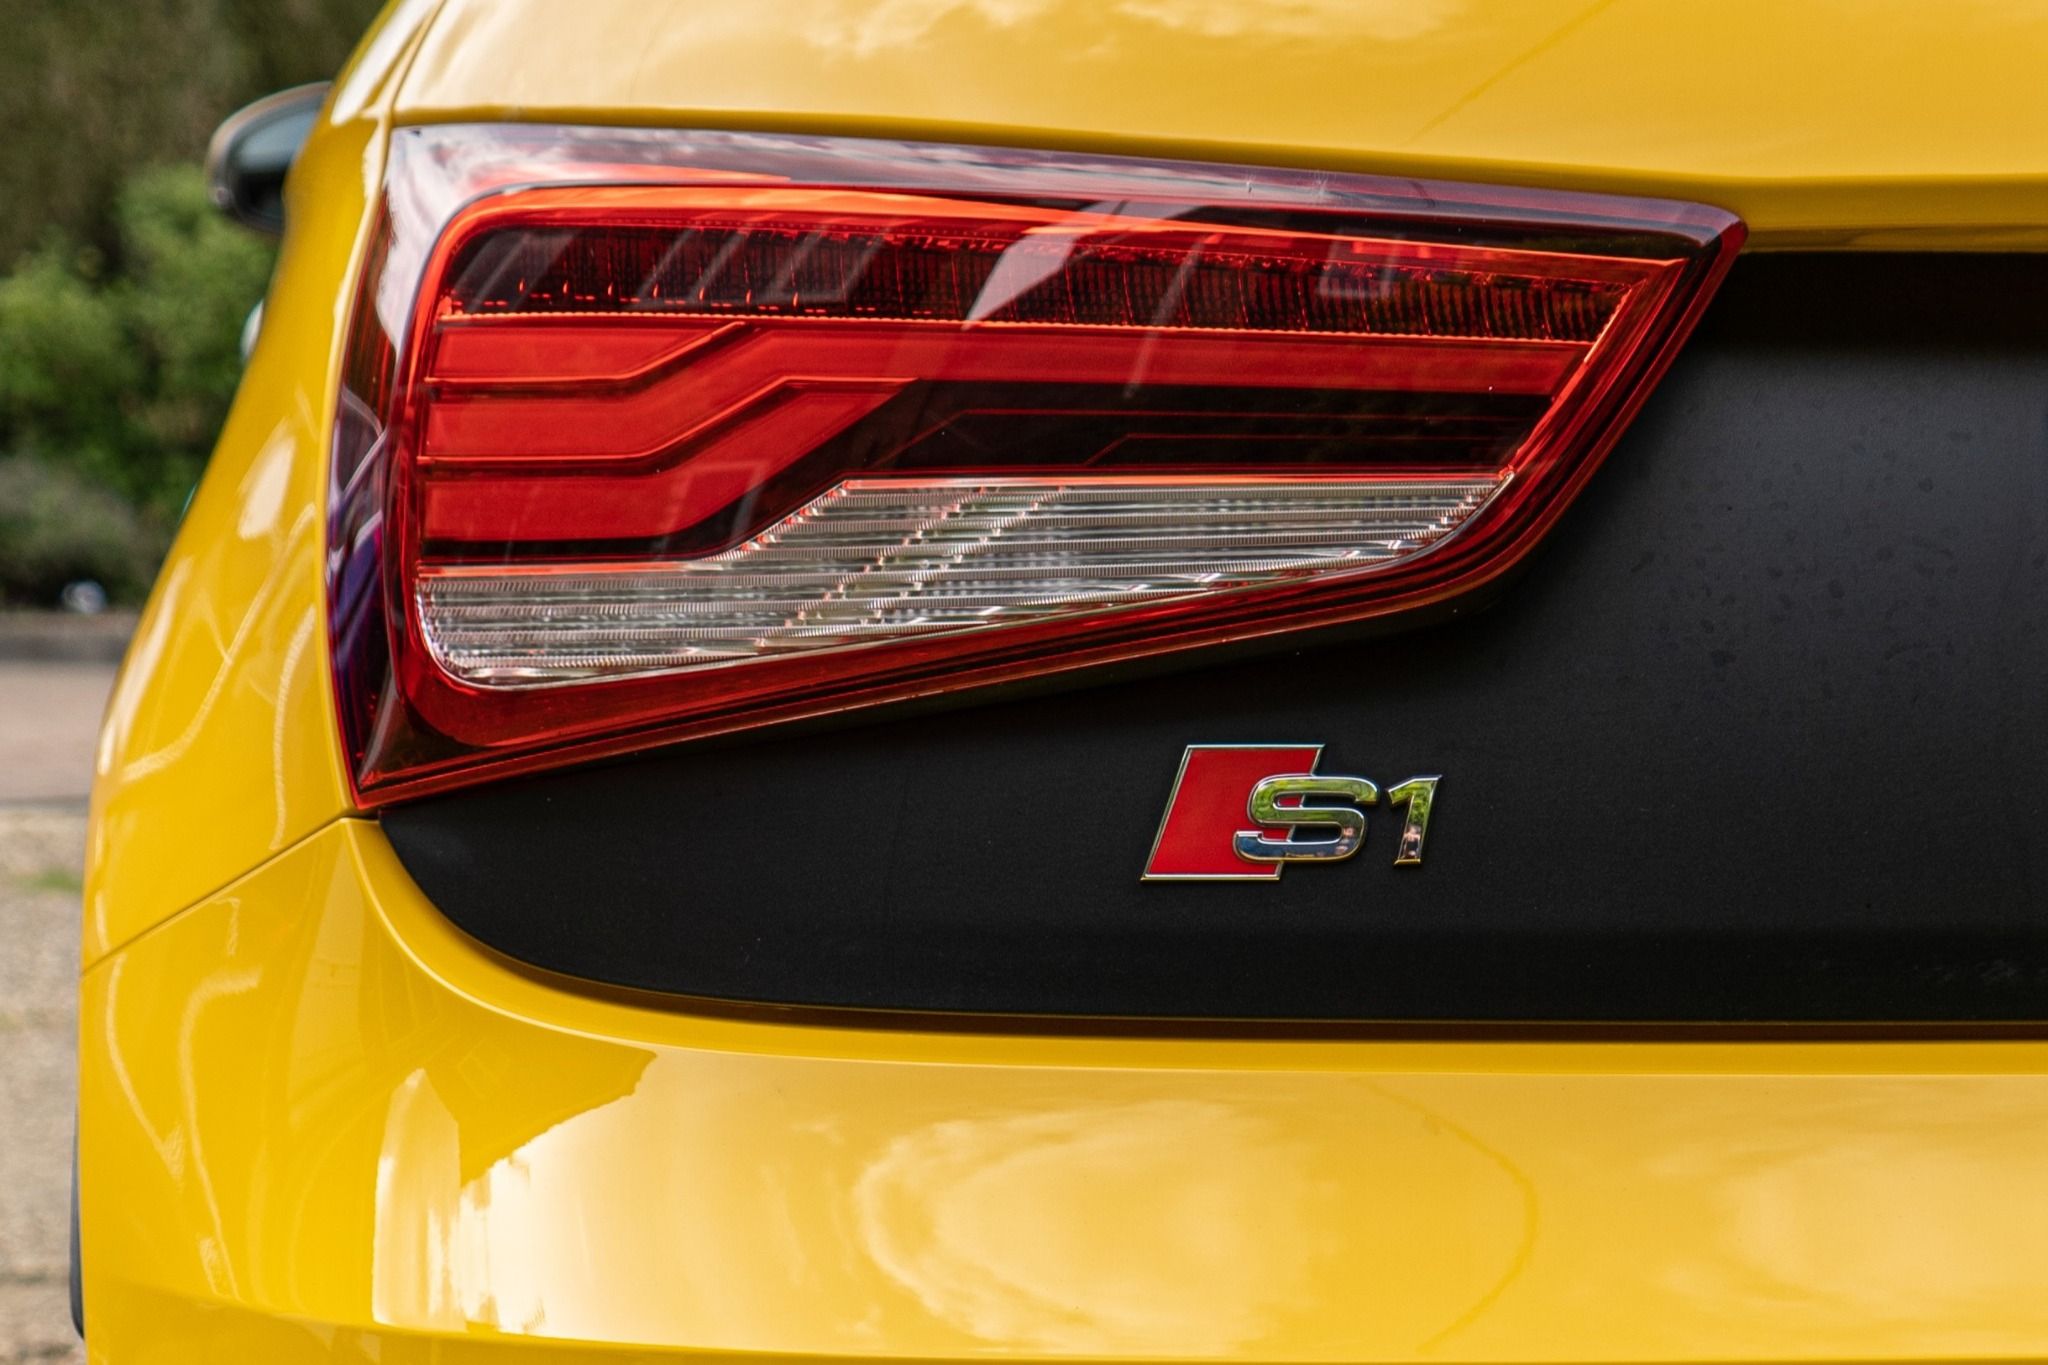 Close up of an Audi S1 rear light and badging